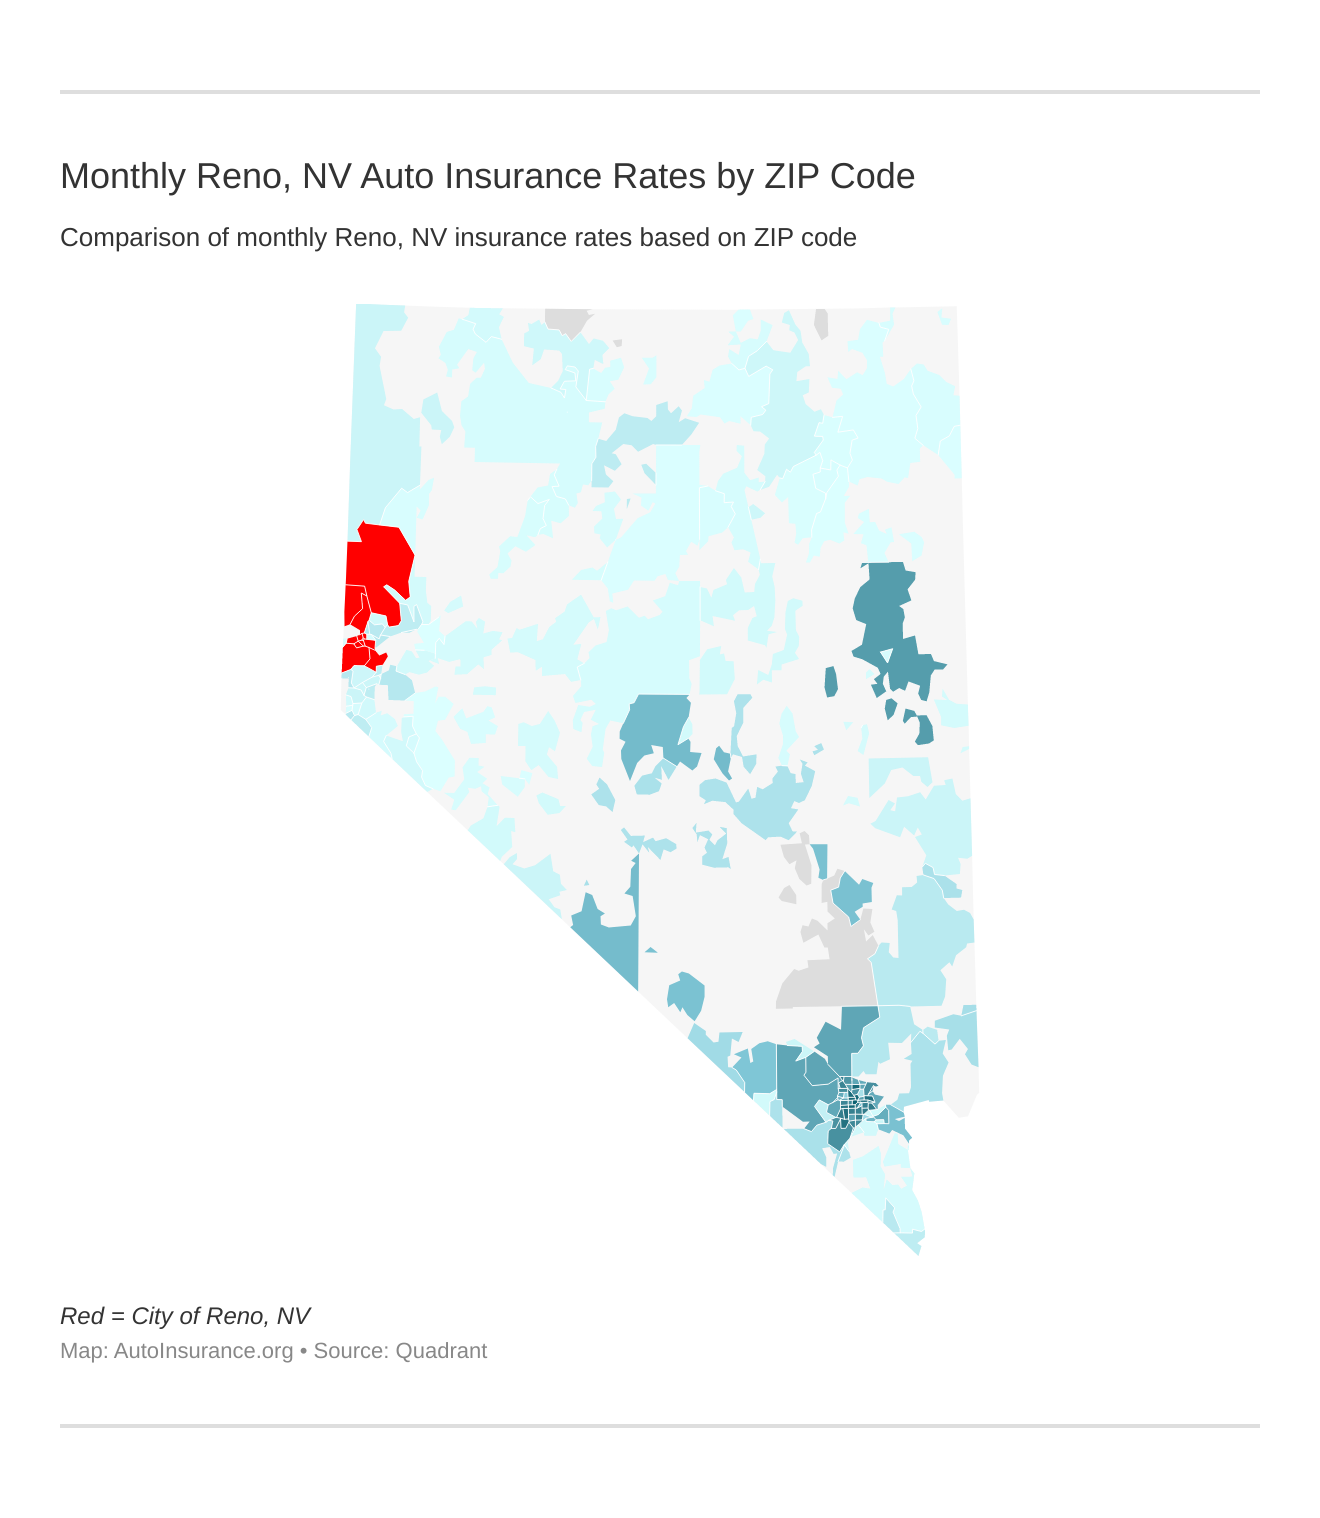 Monthly Reno, NV Auto Insurance Rates by ZIP Code